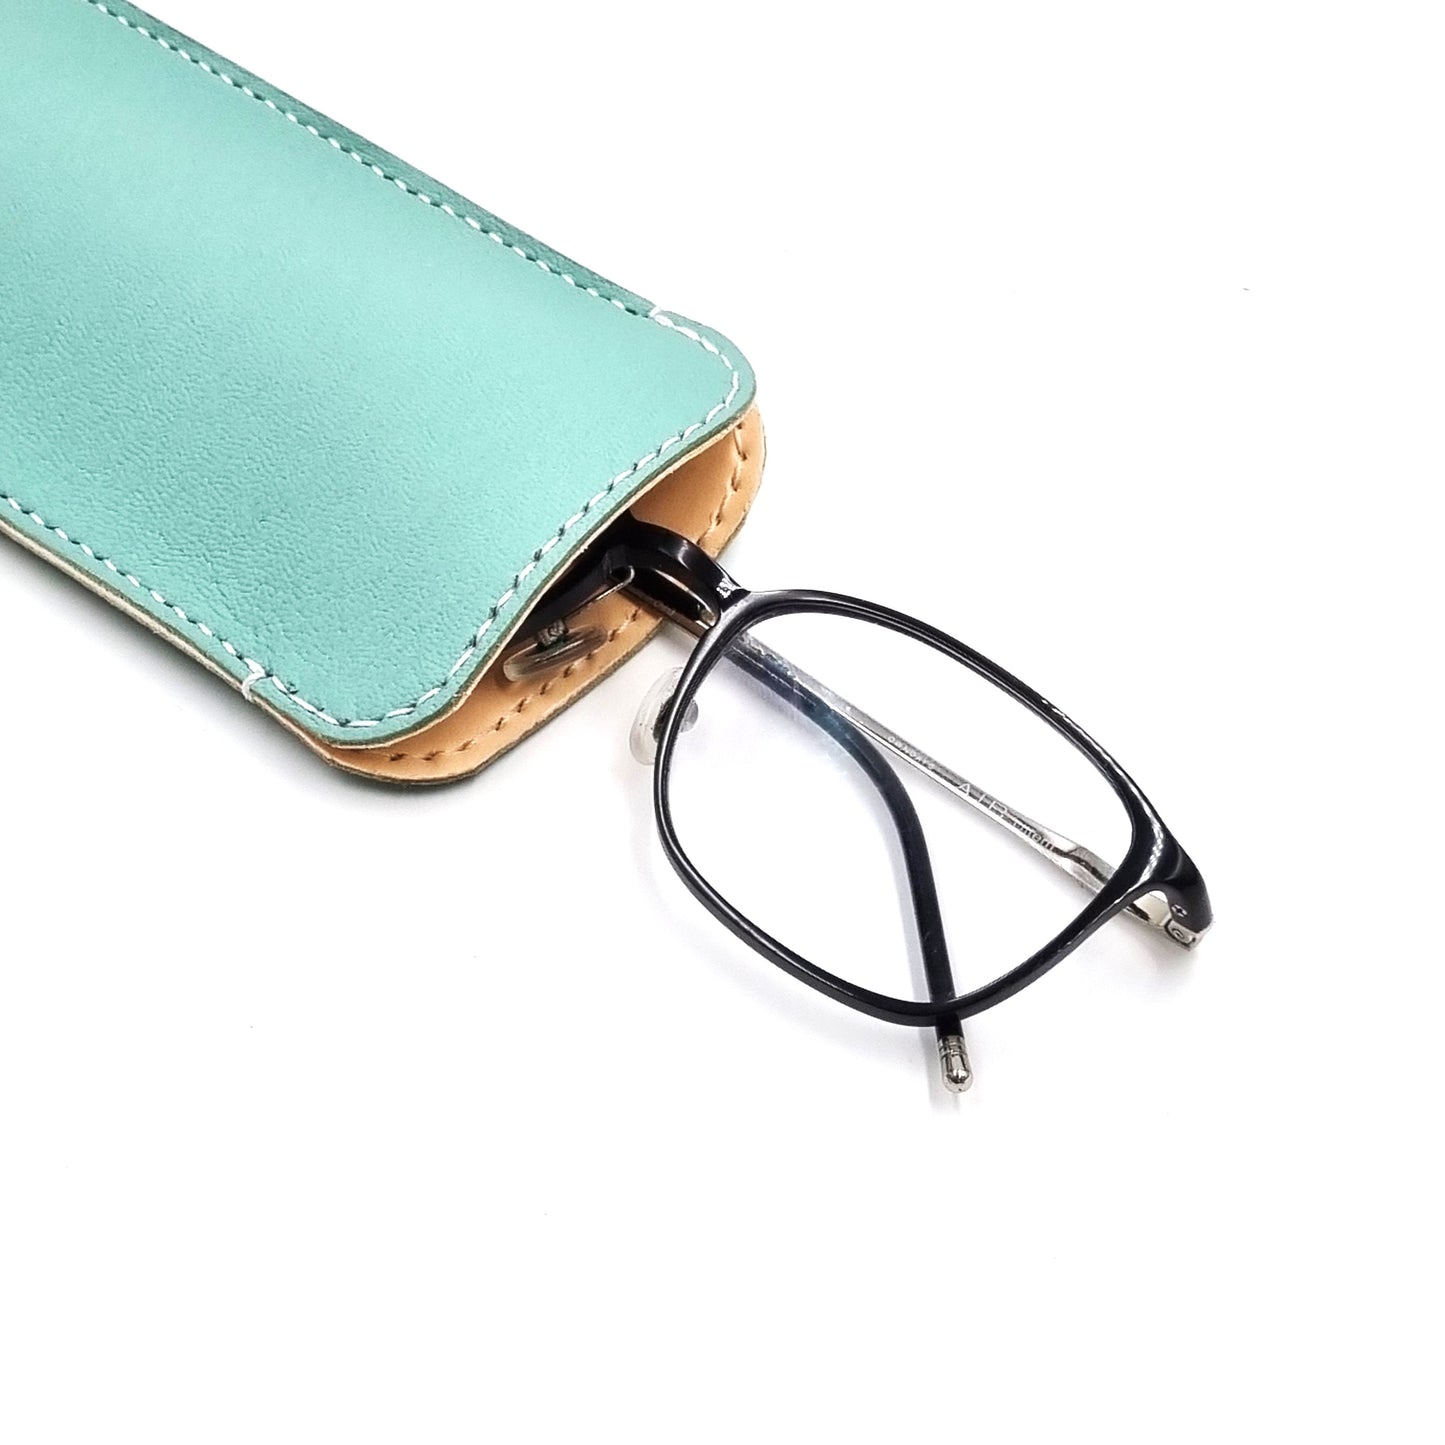 ELI 2 Leather Spectacles Case